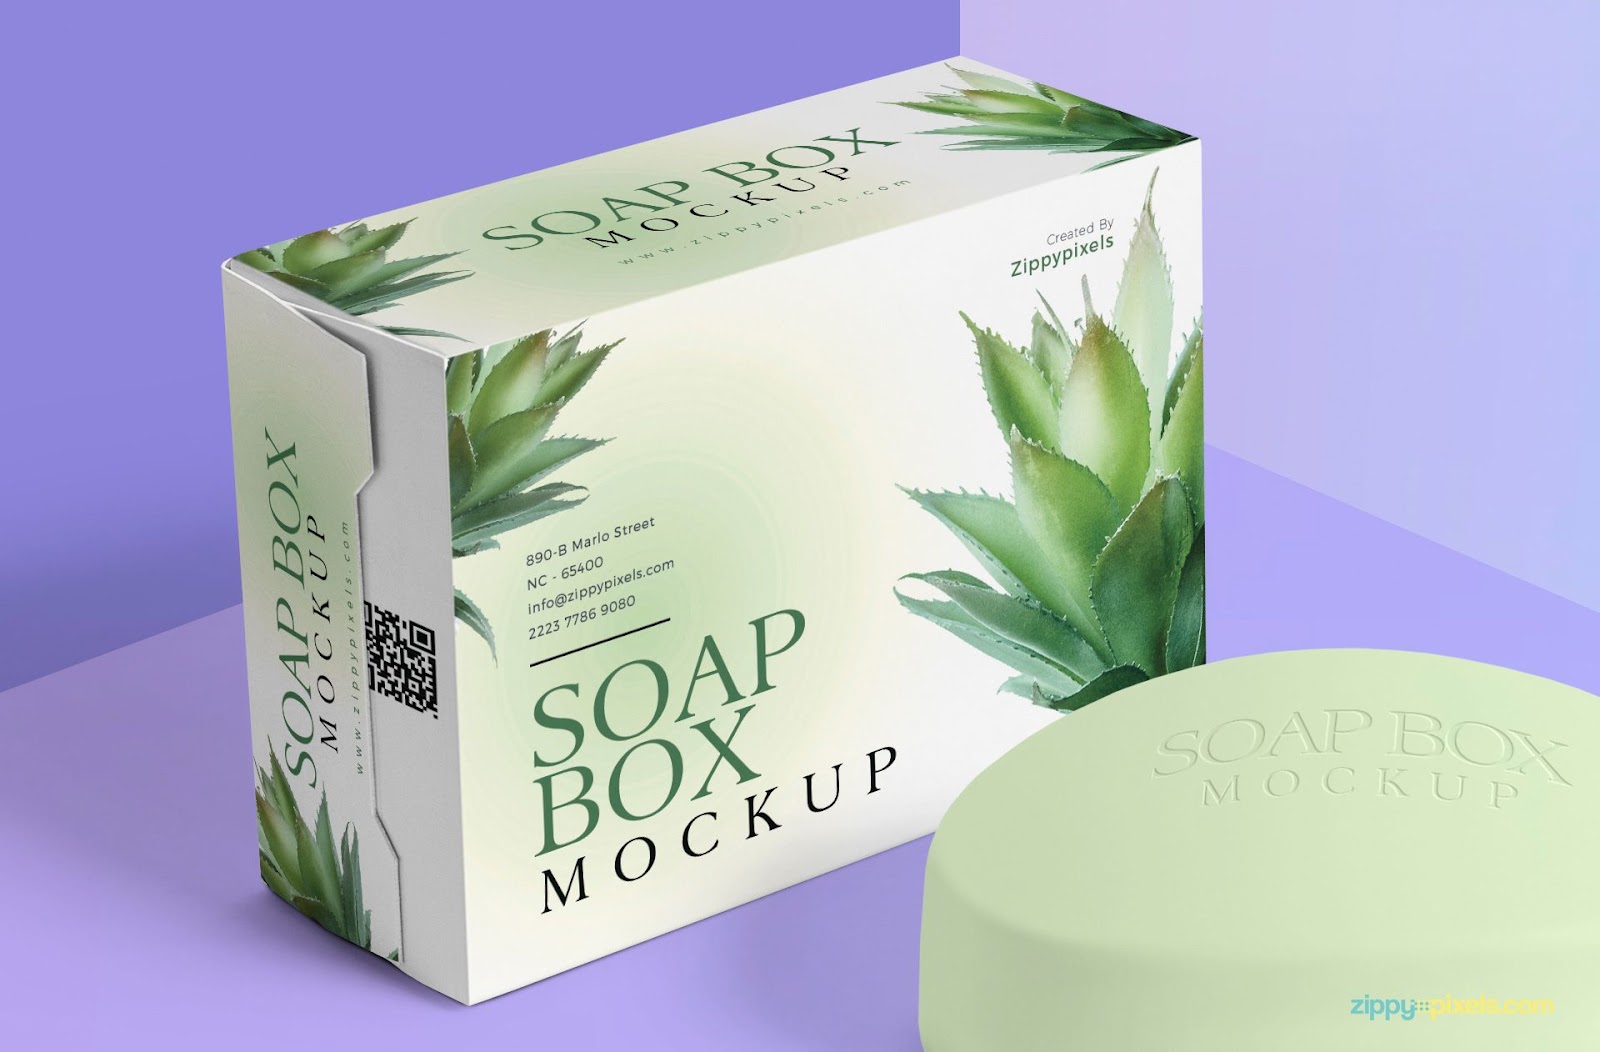 Where Can I Buy Custom Wholesale Soap Boxes?